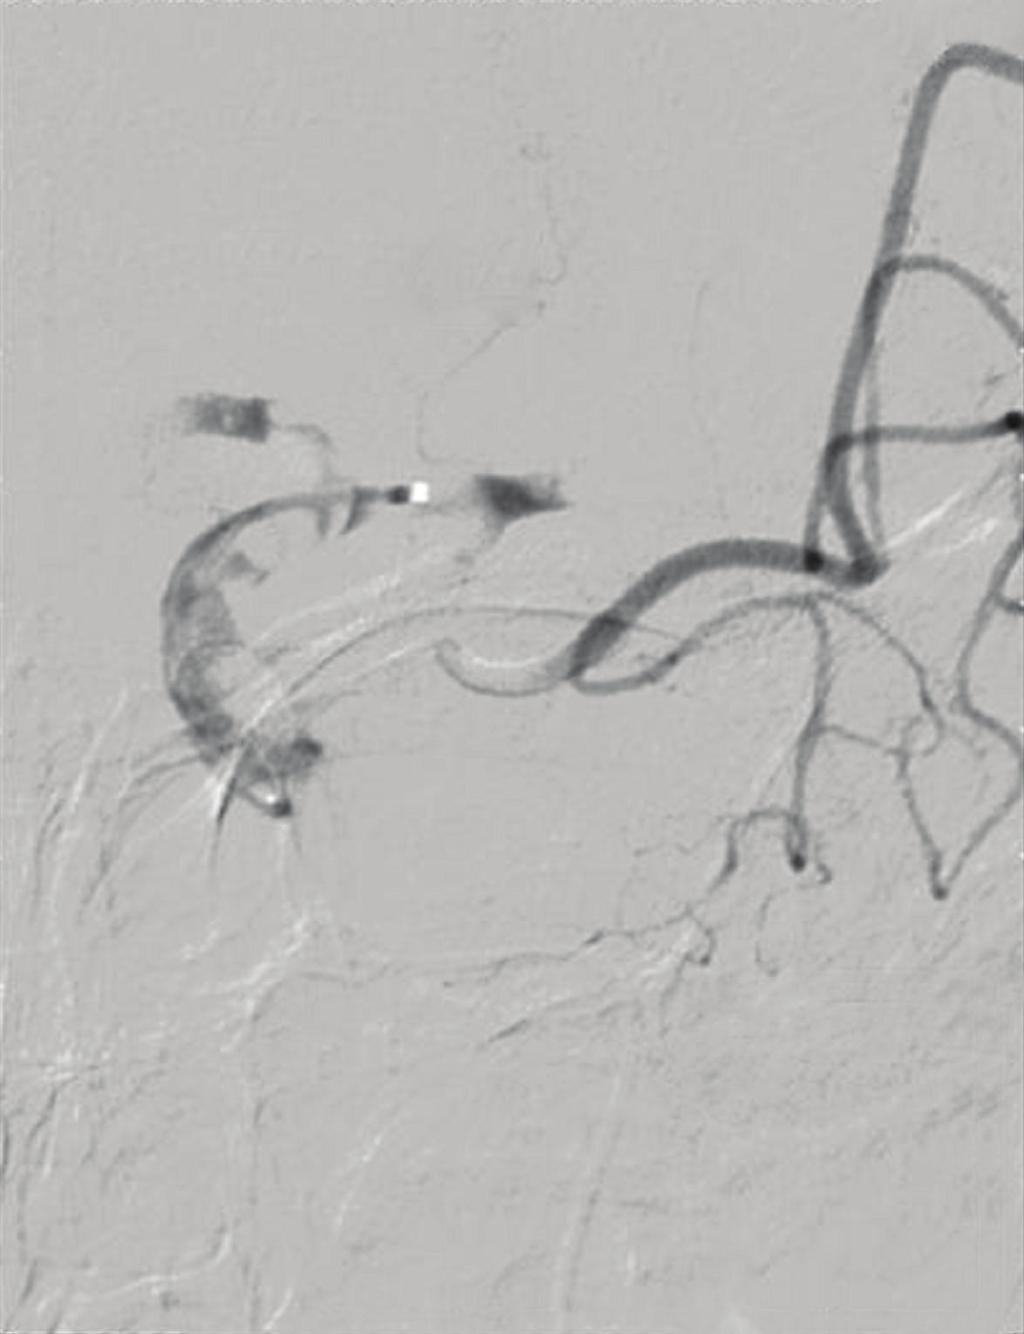 after retraction of the pcr with thrombus left in the M1 segment; (e) and (f) TICI 2a (TIMI 2) reperfusion after second passage with the pcr and administration of 4 mg intraarterial rtpa